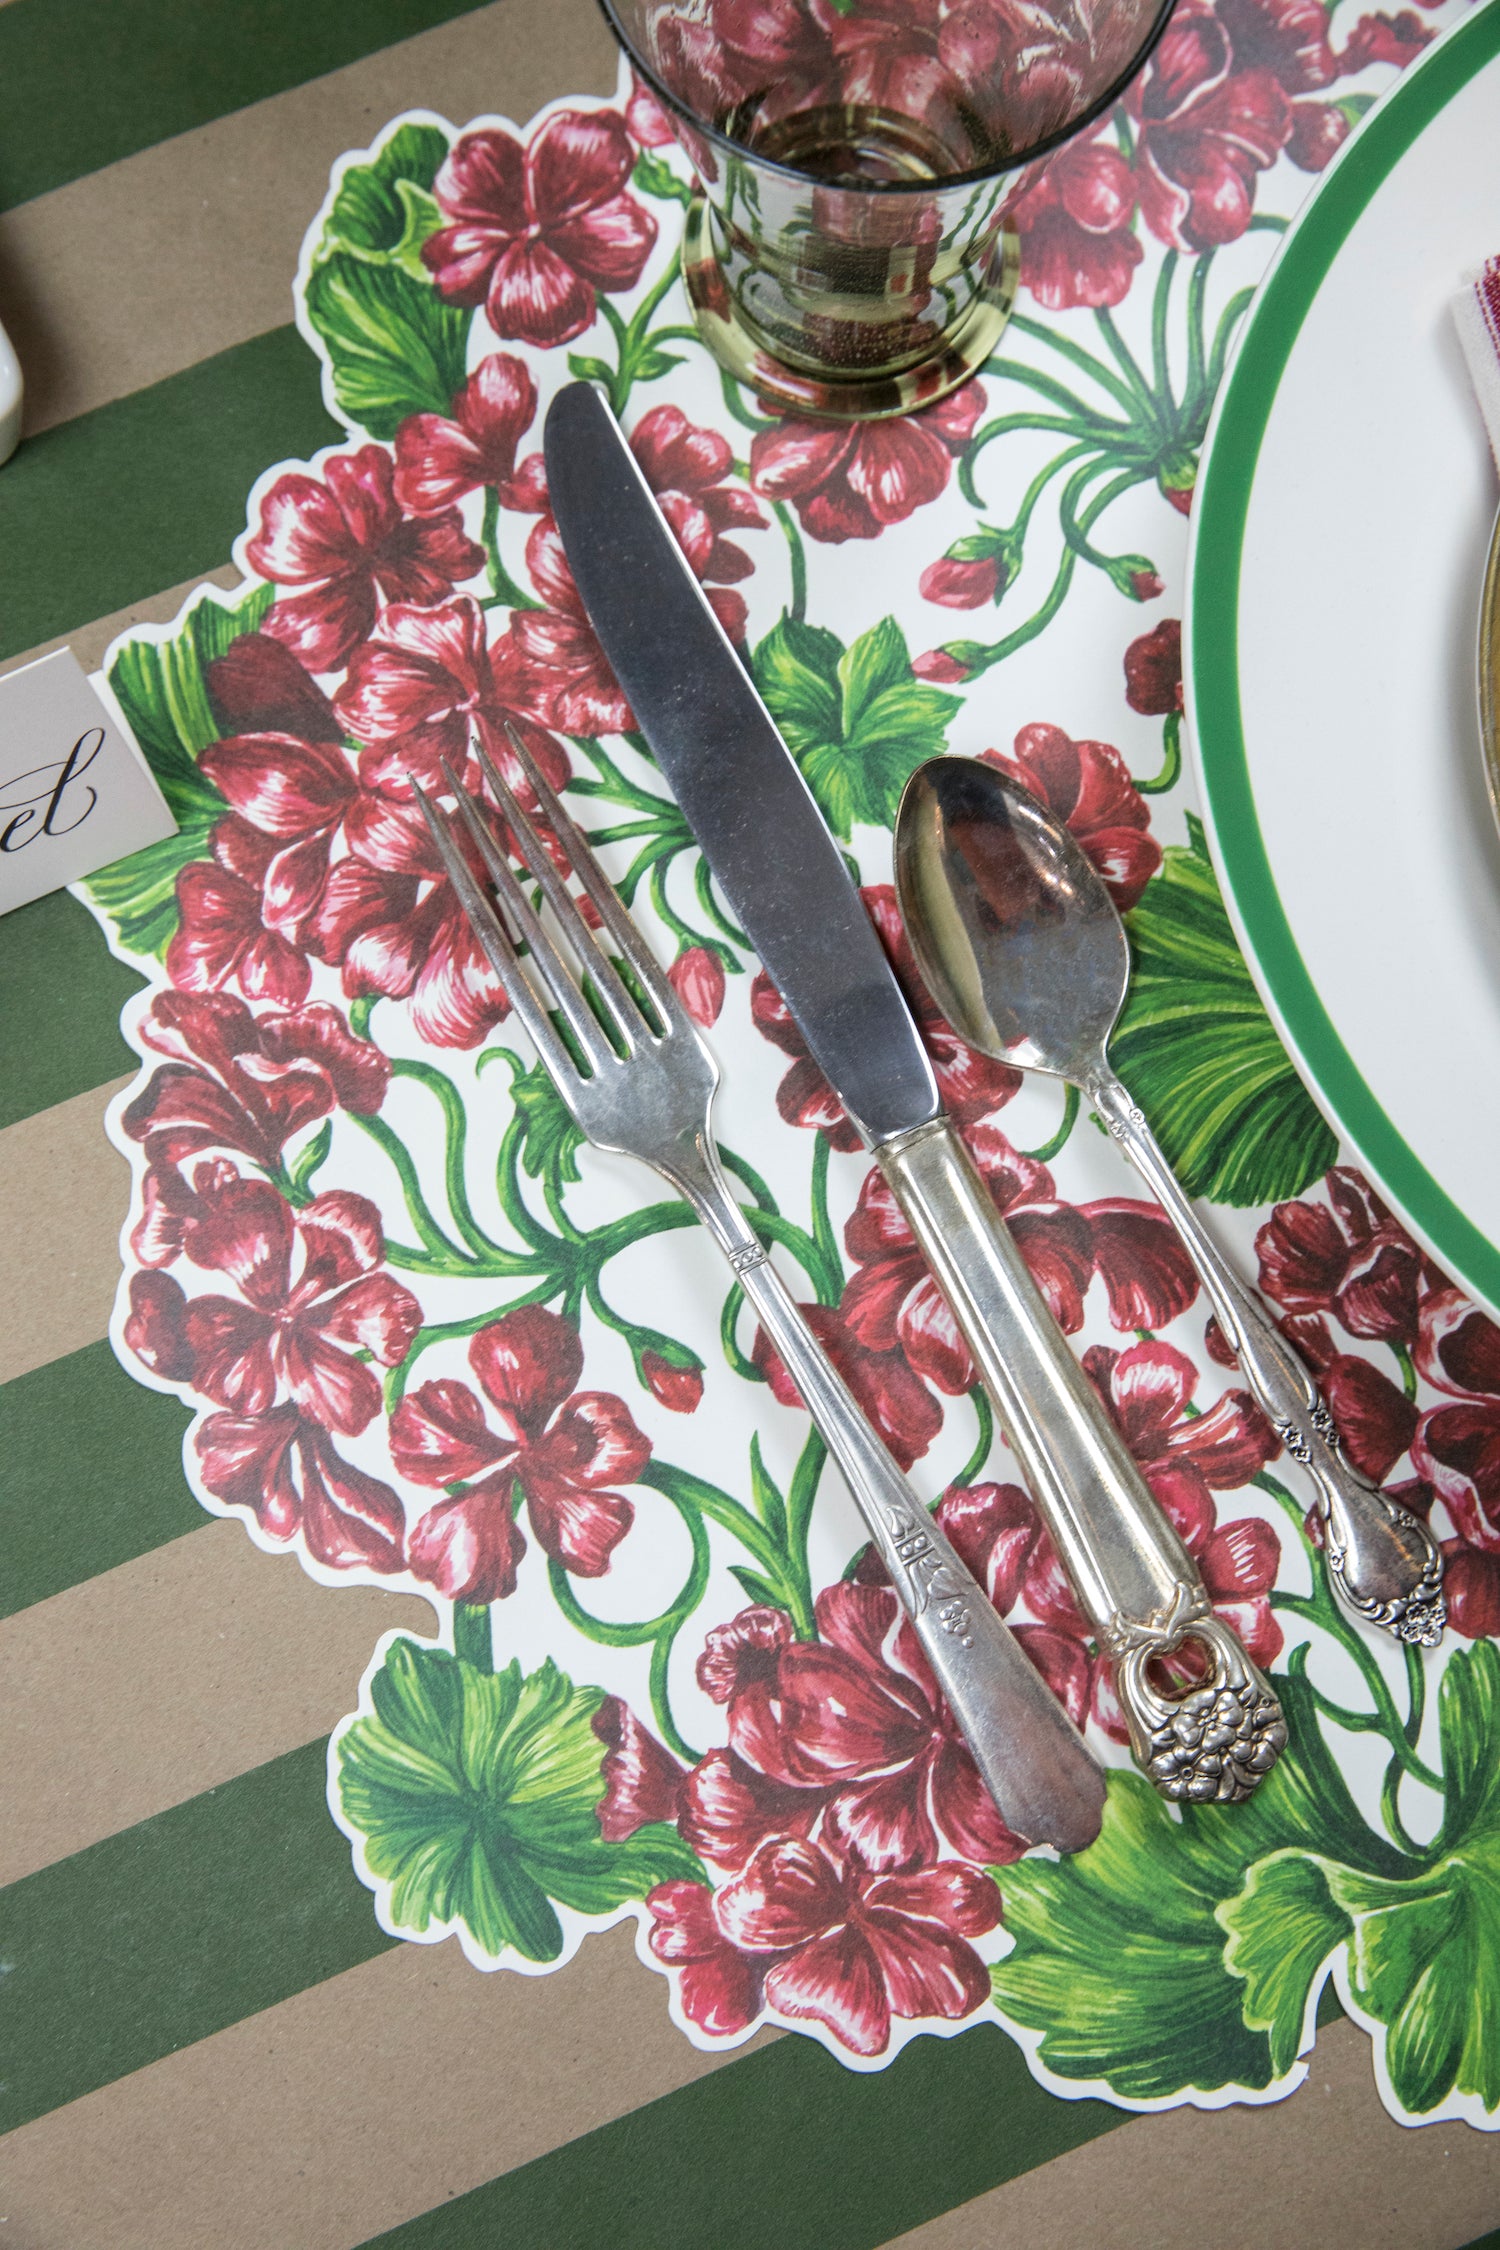 A table setting with a Hester &amp; Cook Die-Cut Geranium Placemat and silverware.